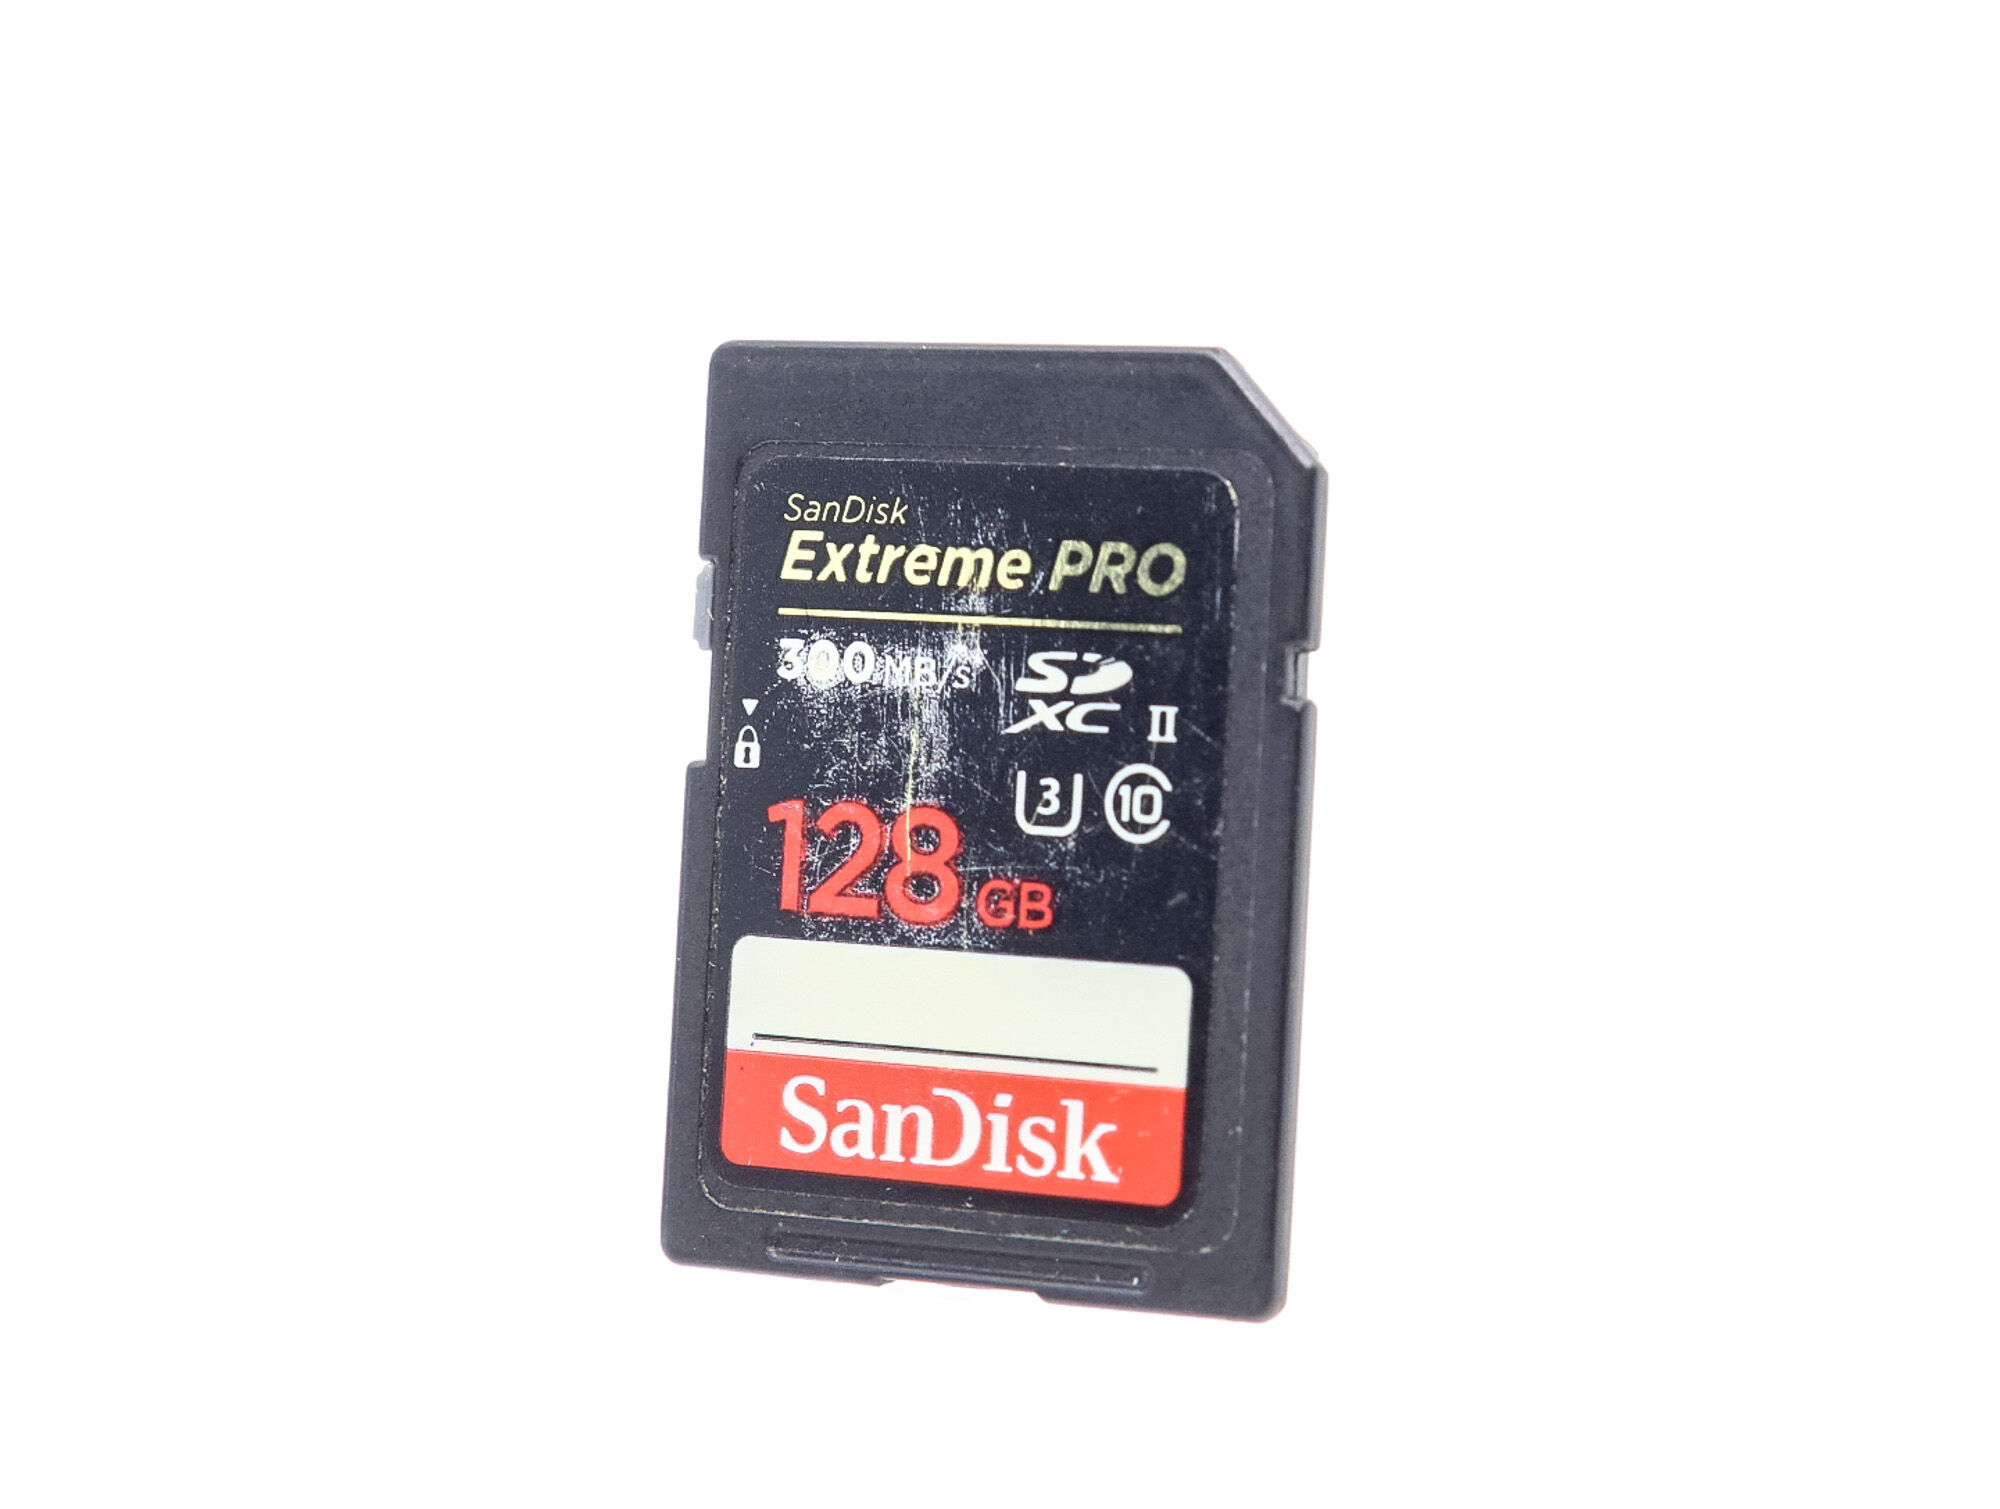 Occasion SanDisk 128Go Extreme Pro 300 MB/s UHS-II SDXC - Carte mémoire SD